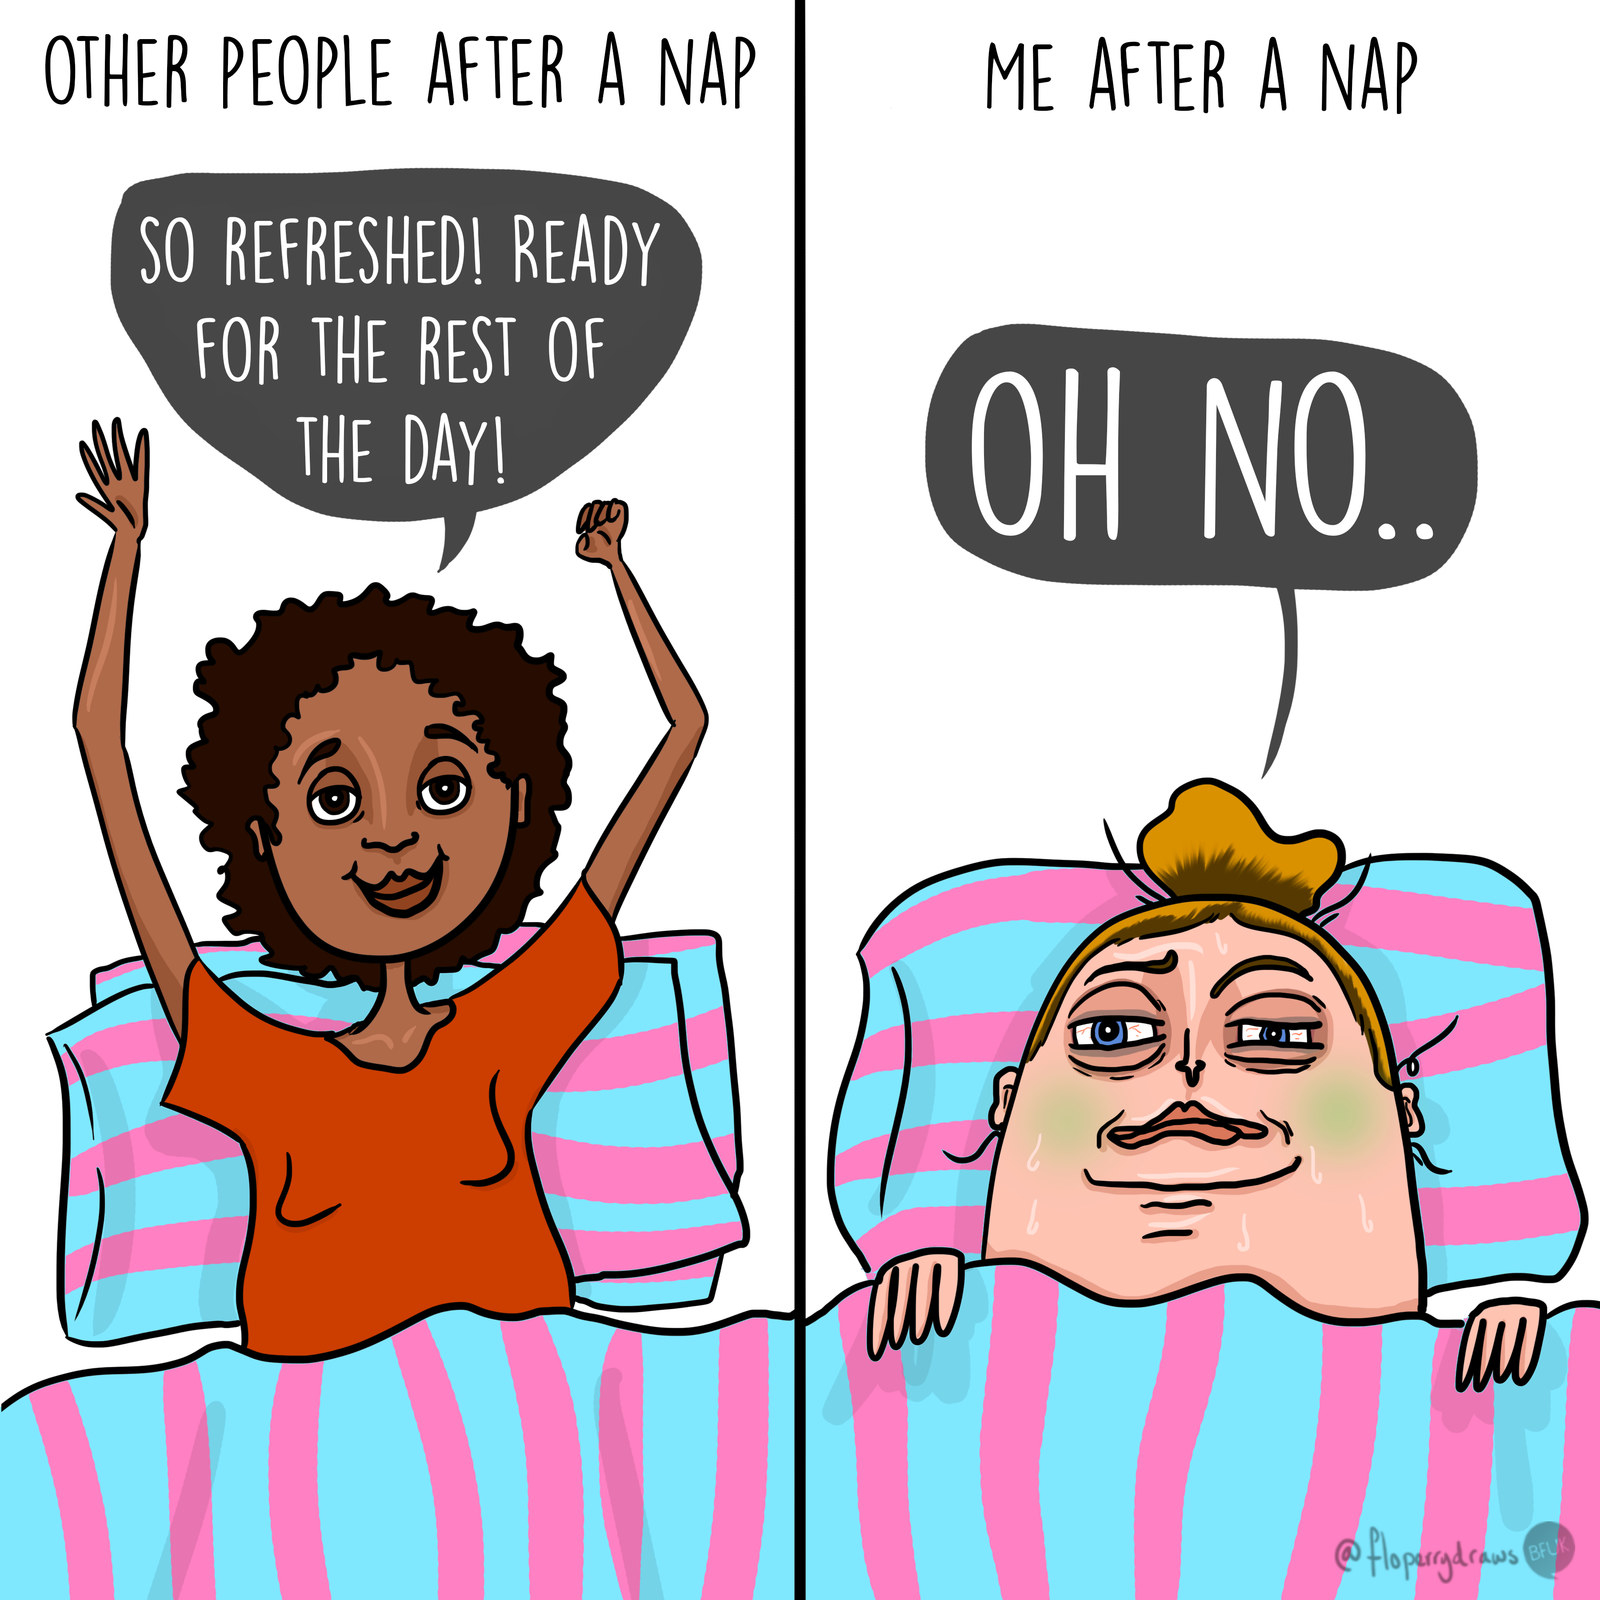 17 Comics That Are 100% Funny, 100% Relatable, And 100% What You Need Today